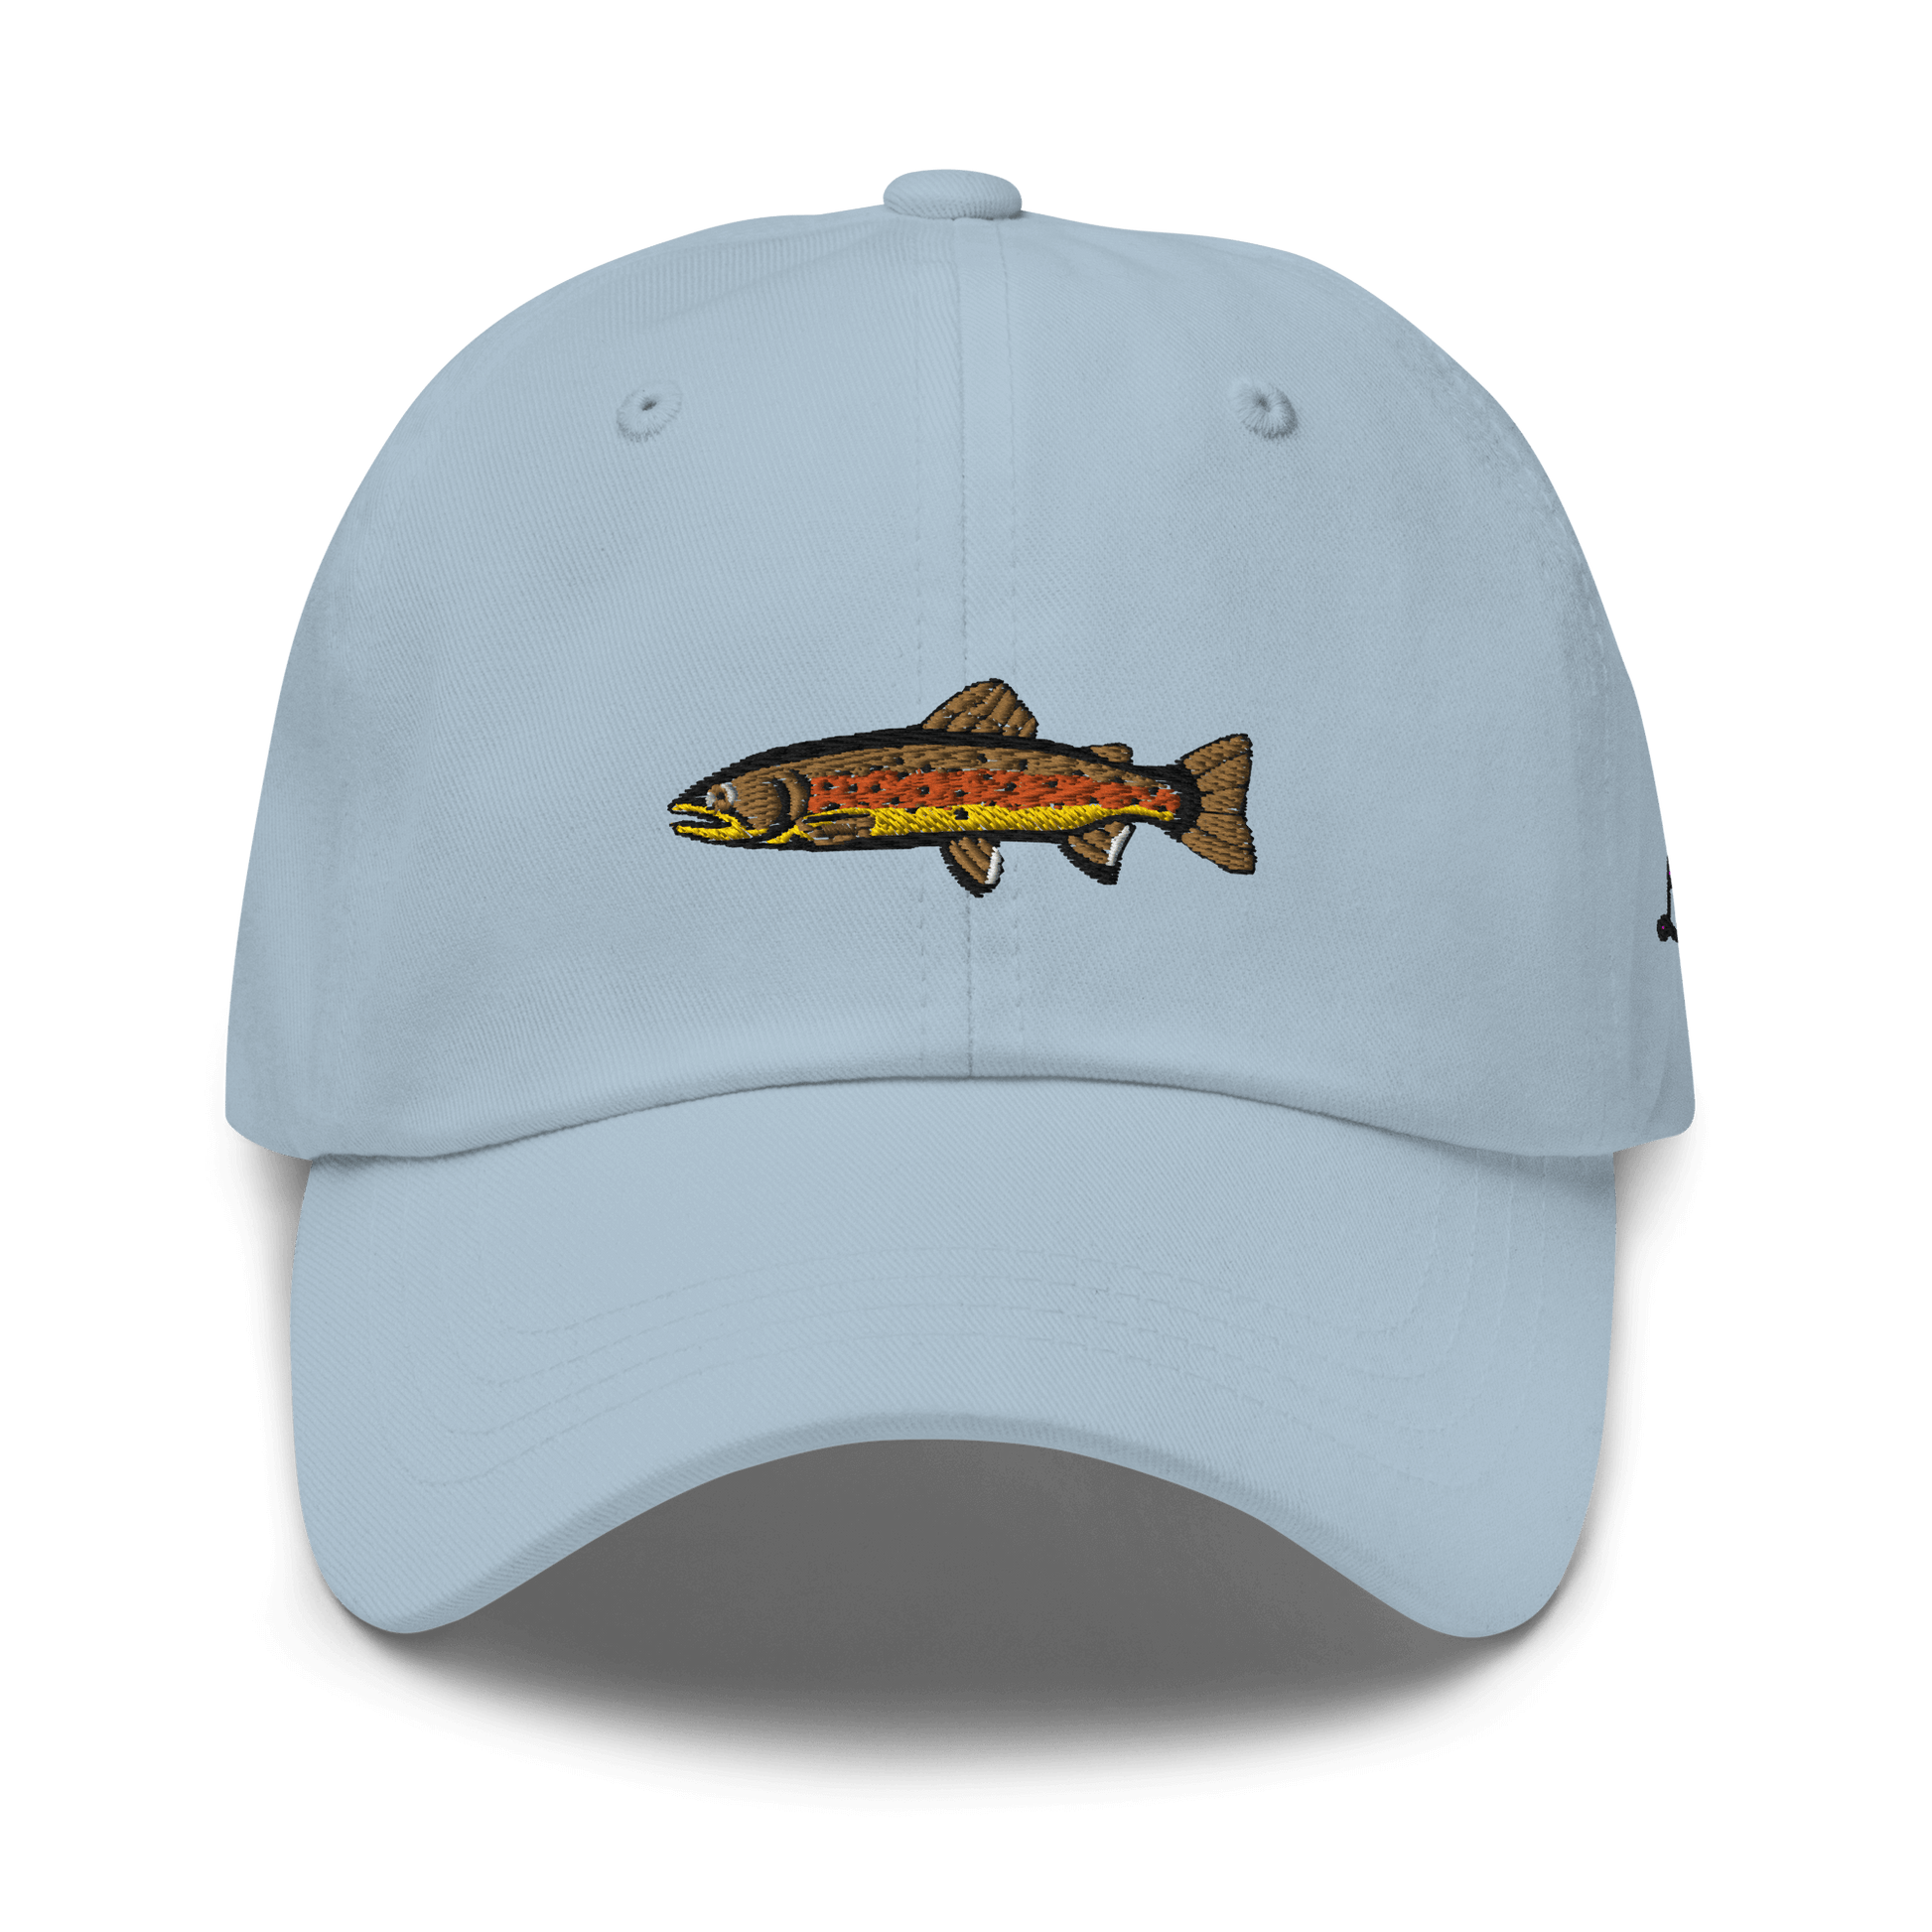 Brown Trout fishing hat. It’s a simple embroidered hat/ dad hat with a brown trout and the lost lure logo on the side. Light blue, front side